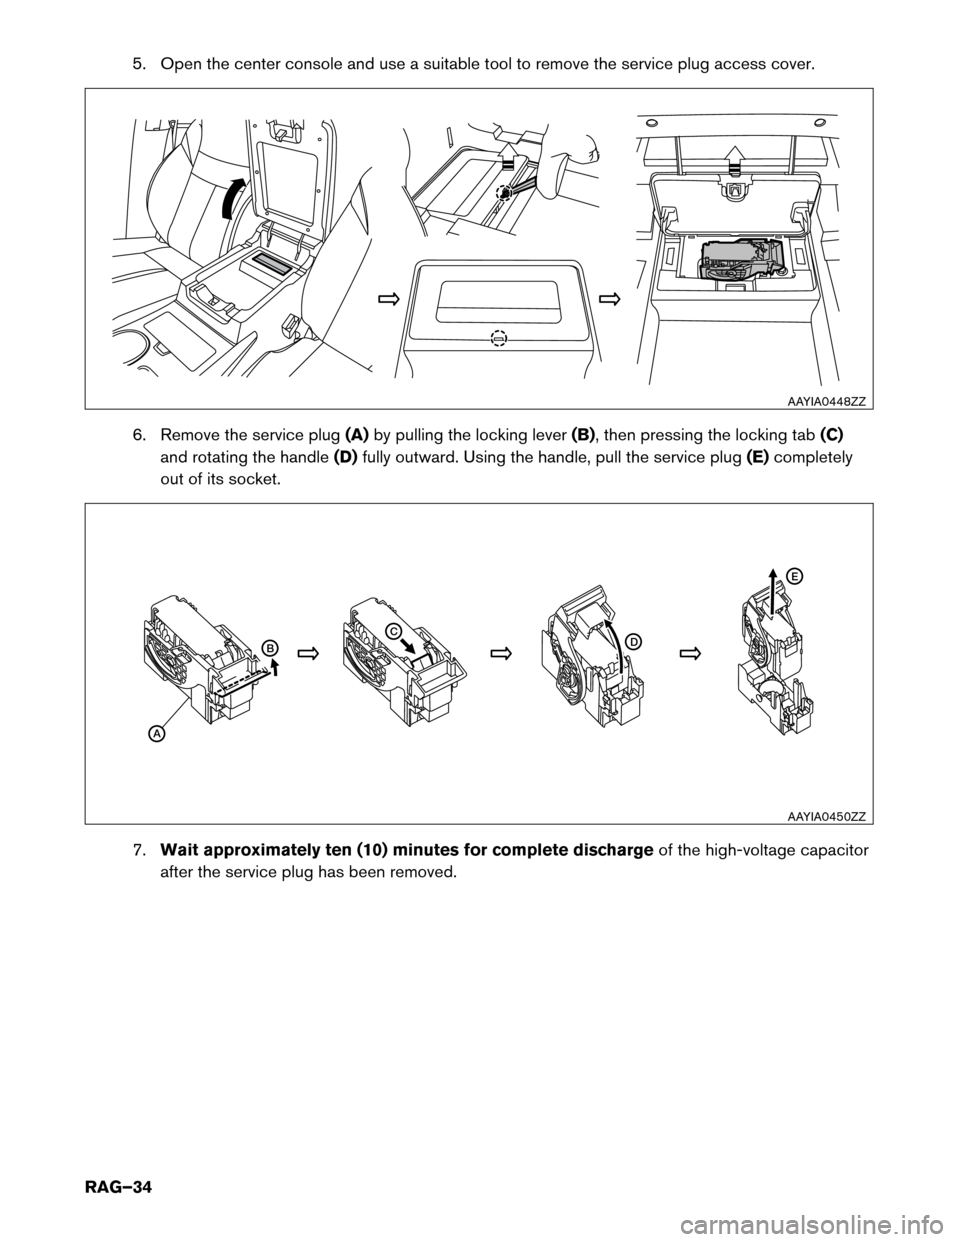 NISSAN MURANO HYBRID 2016 3.G Roadside Assistance Guide 5. Open the center console and use a suitable tool to remove the service plug access cover.
6.
Remove the service plug (A)by pulling the locking lever (B), then pressing the locking tab (C)
and rotati